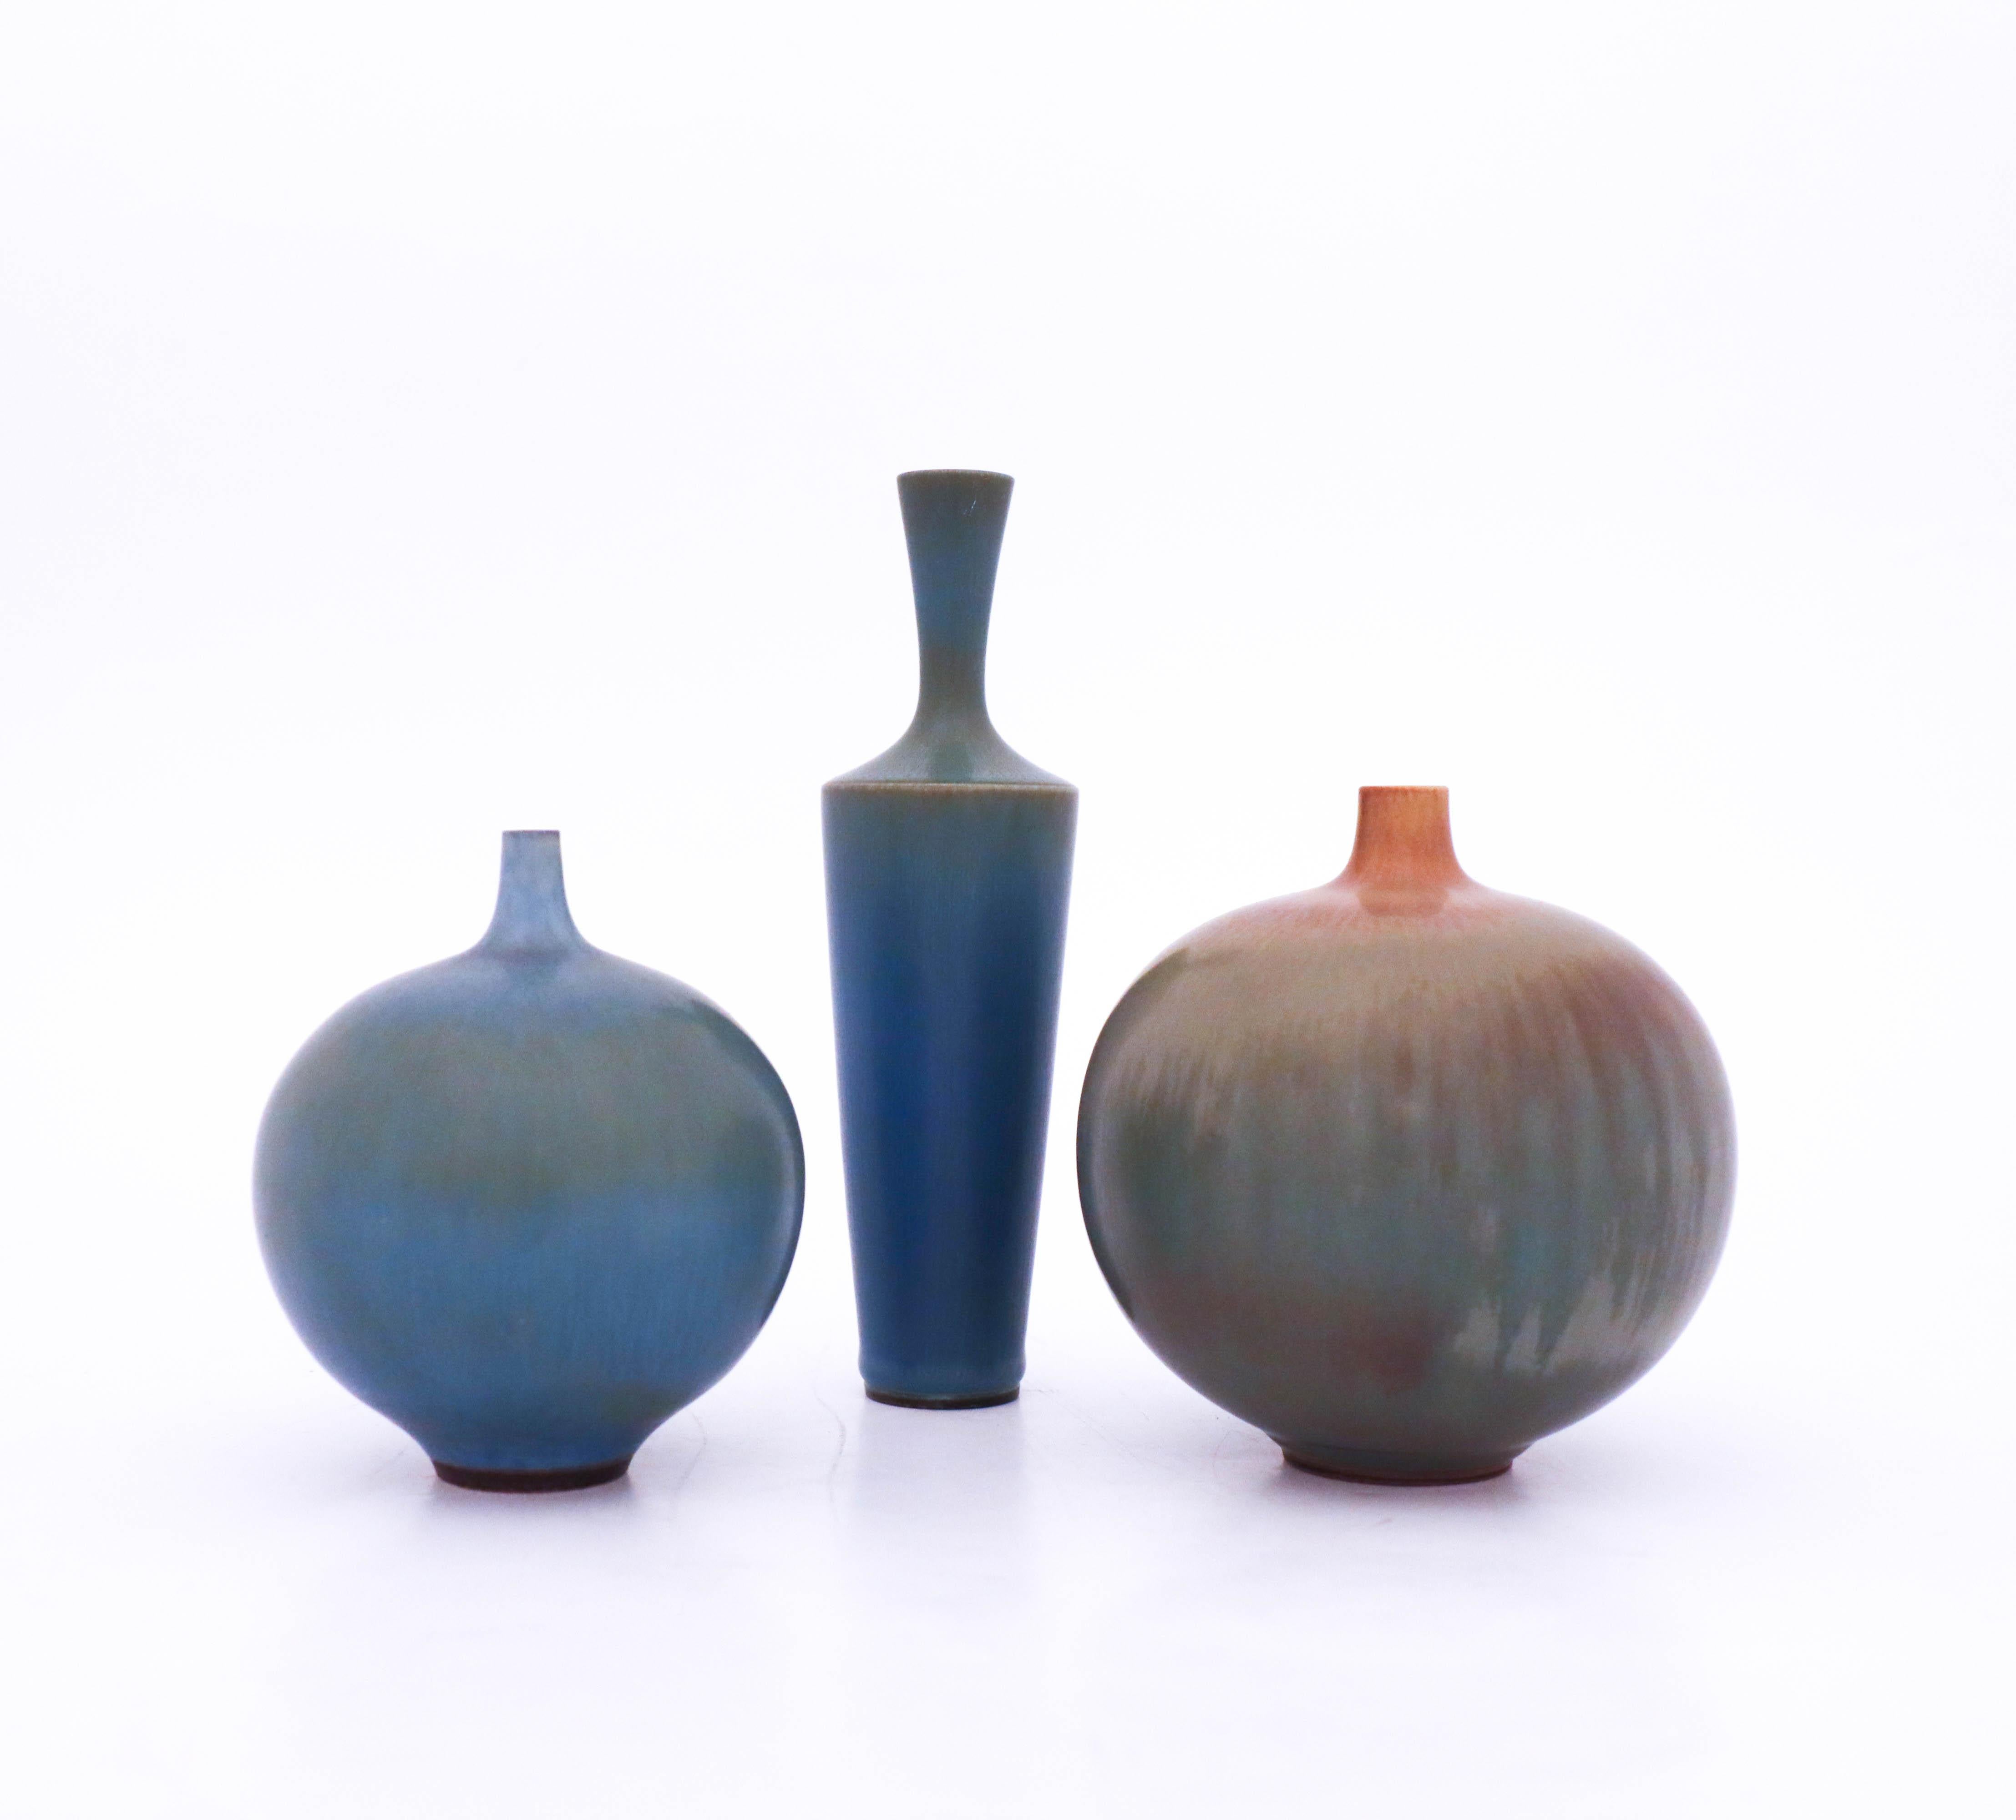 A group of three vases designed by Berndt Friberg from Gustavsberg. The vases are 16.5 cm, 11.5 cm and 10.5 cm. They are in very good condition.